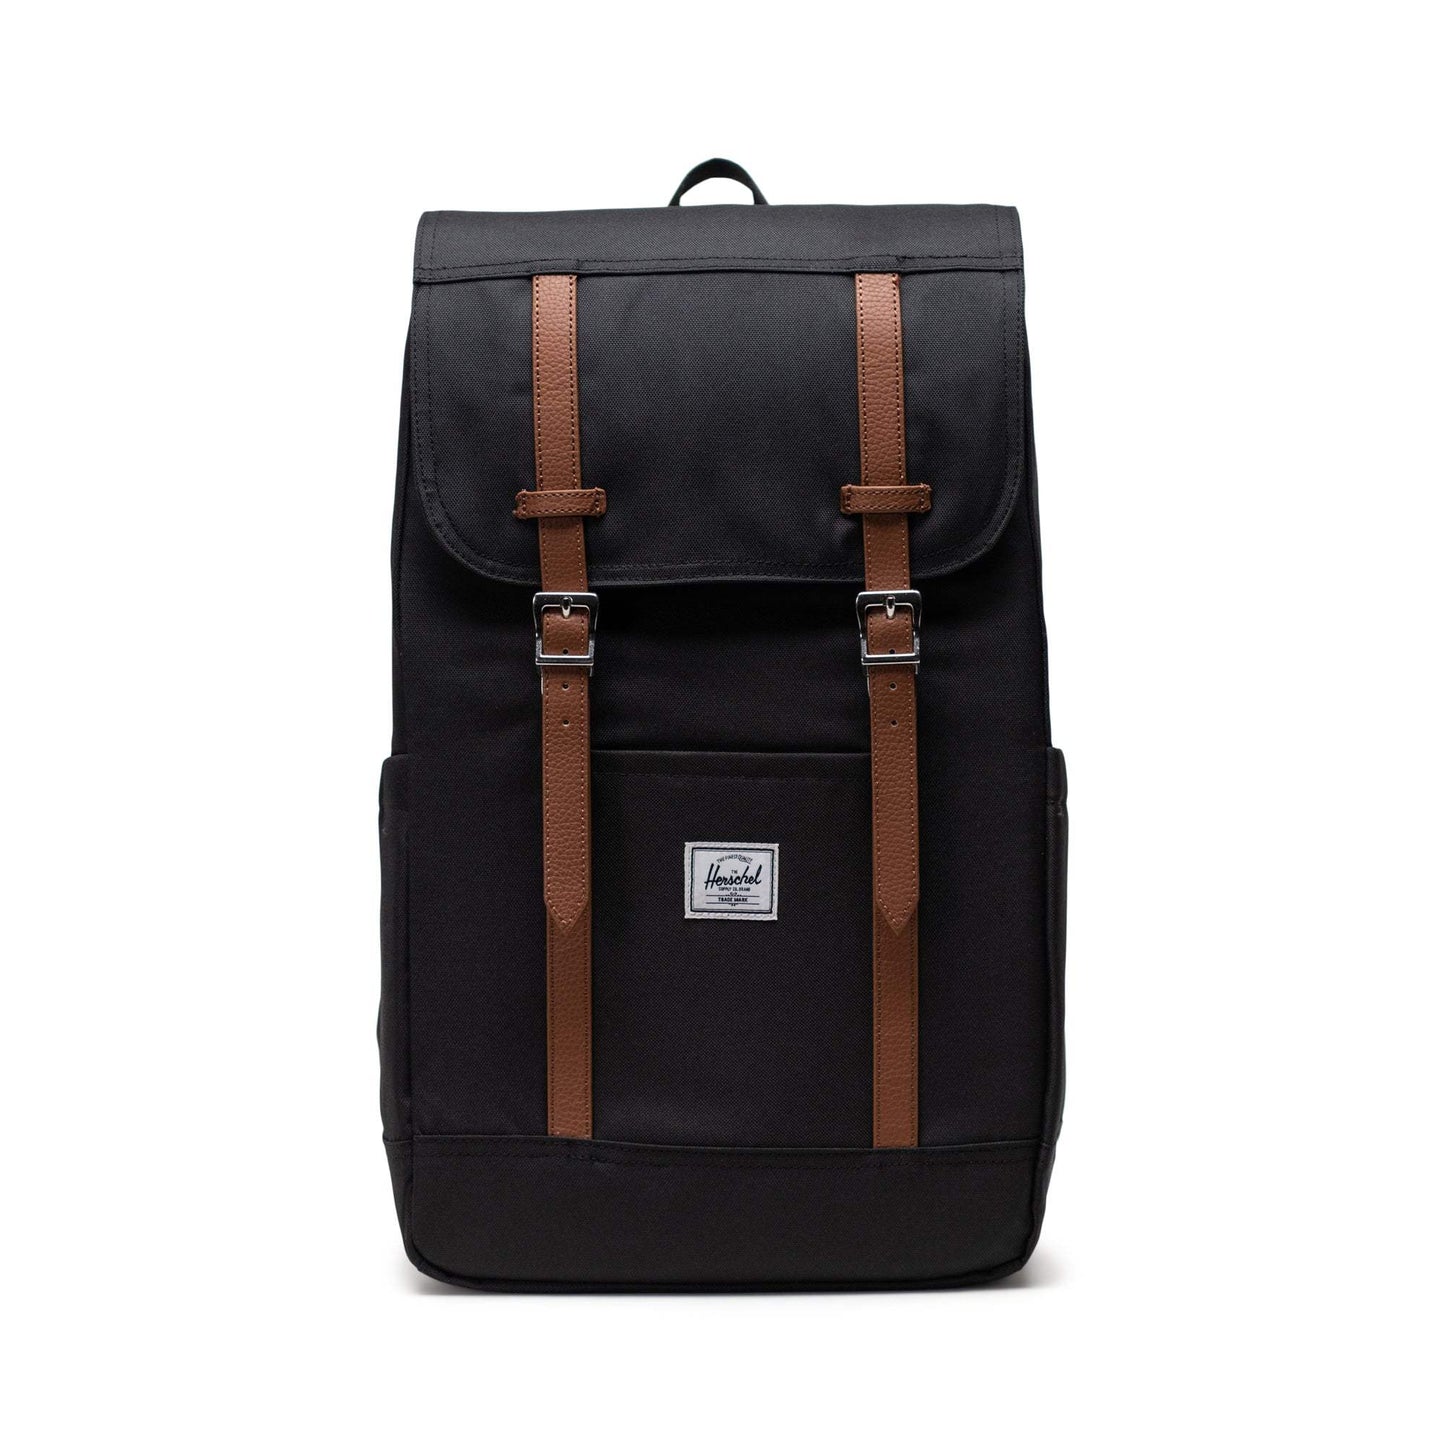 Retreat Backpack by Herschel - The Luxury Promotional Gifts Company Limited